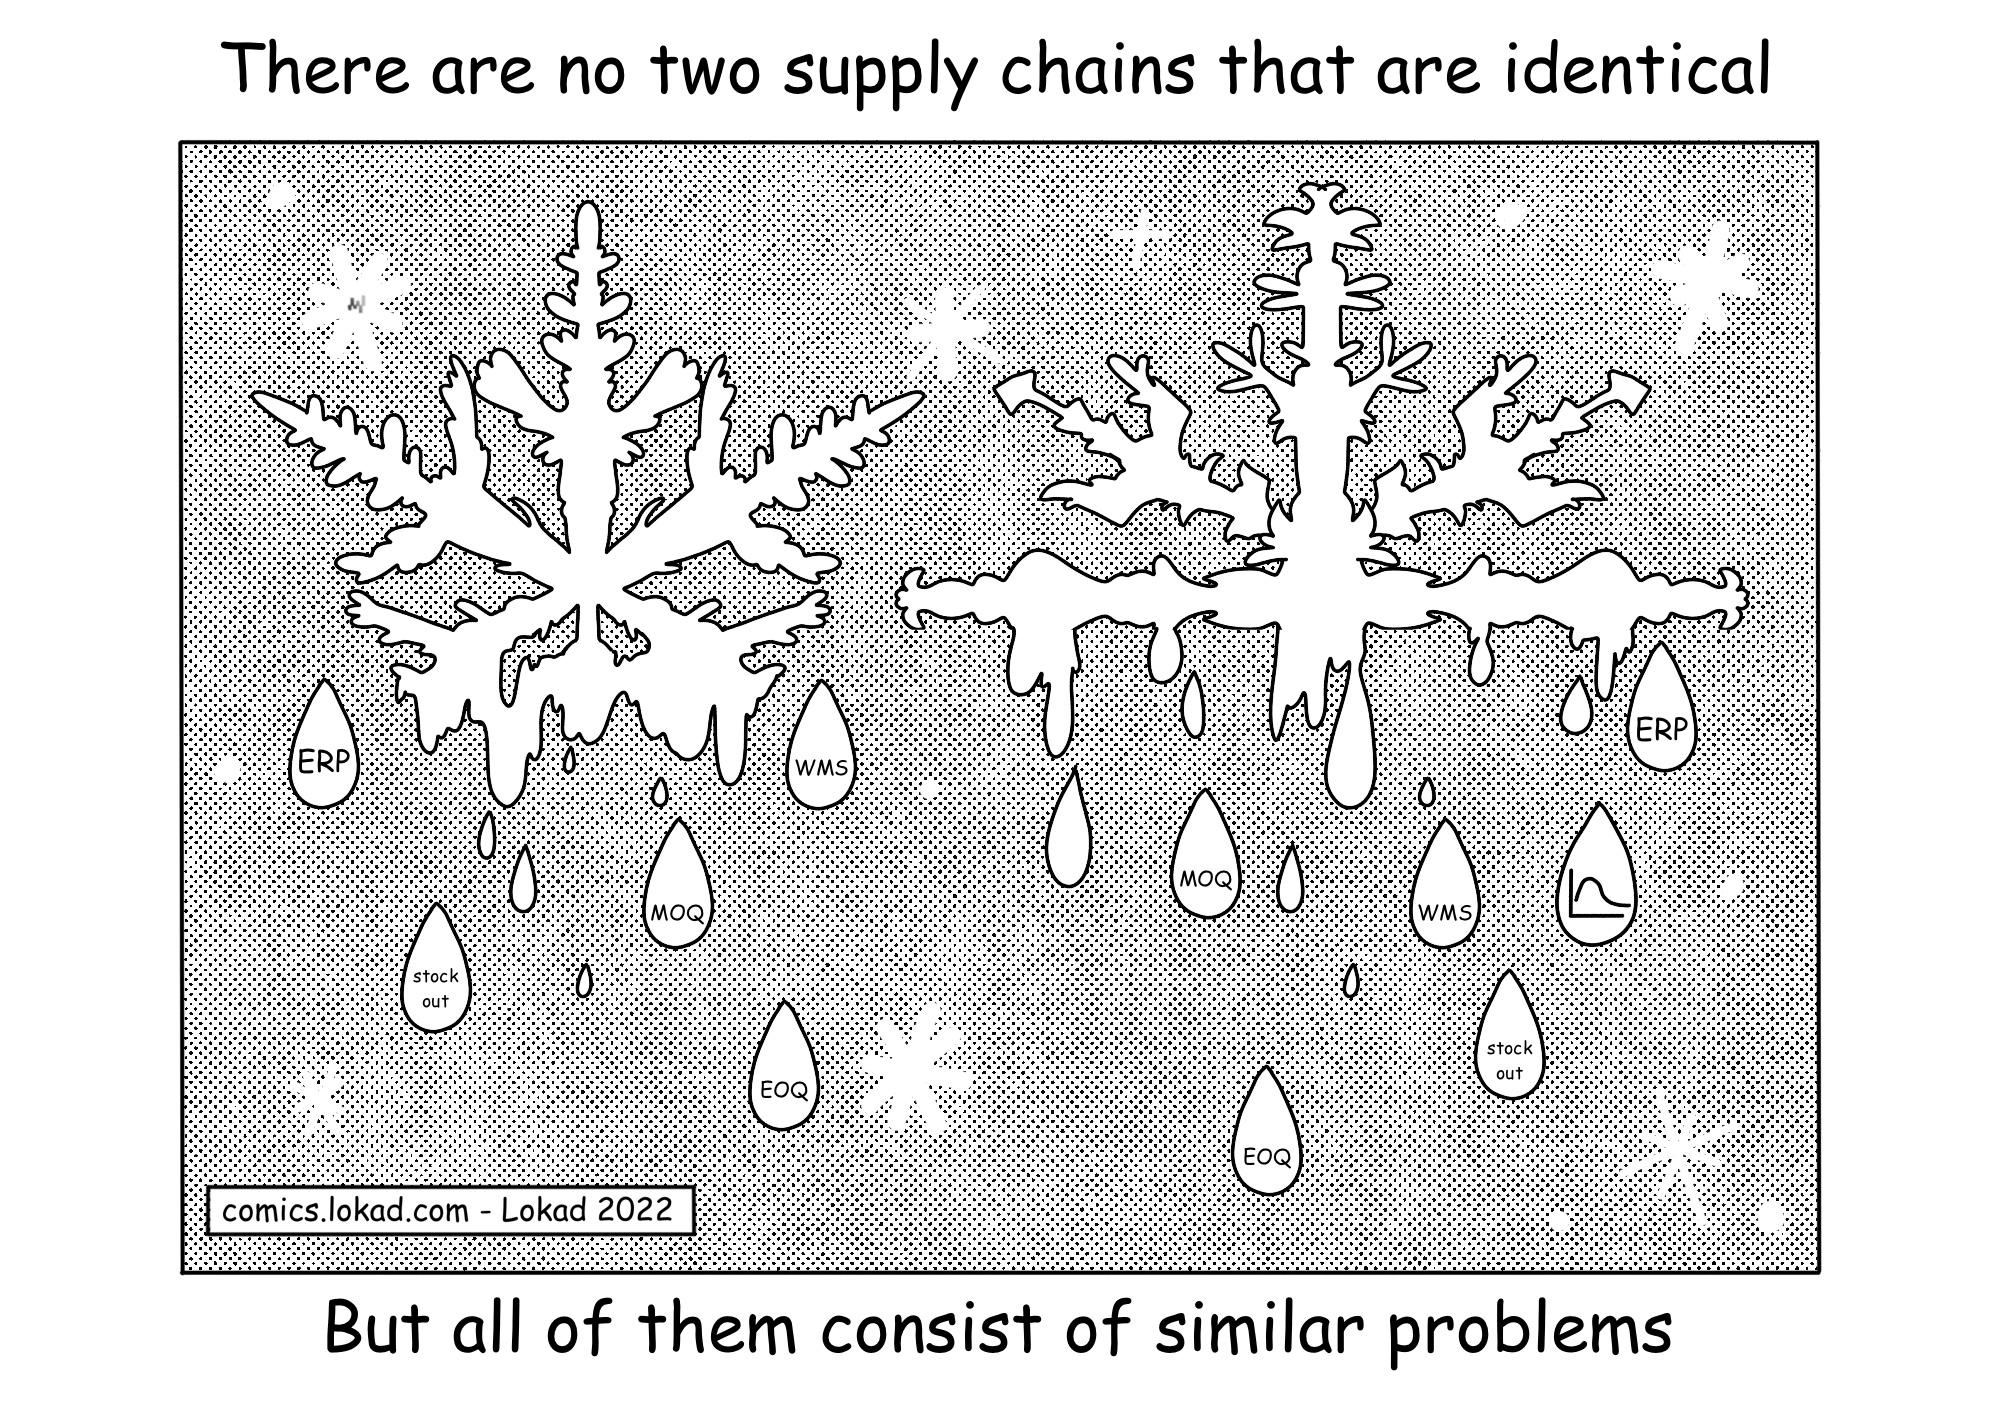 There are no two supply chains that are identical